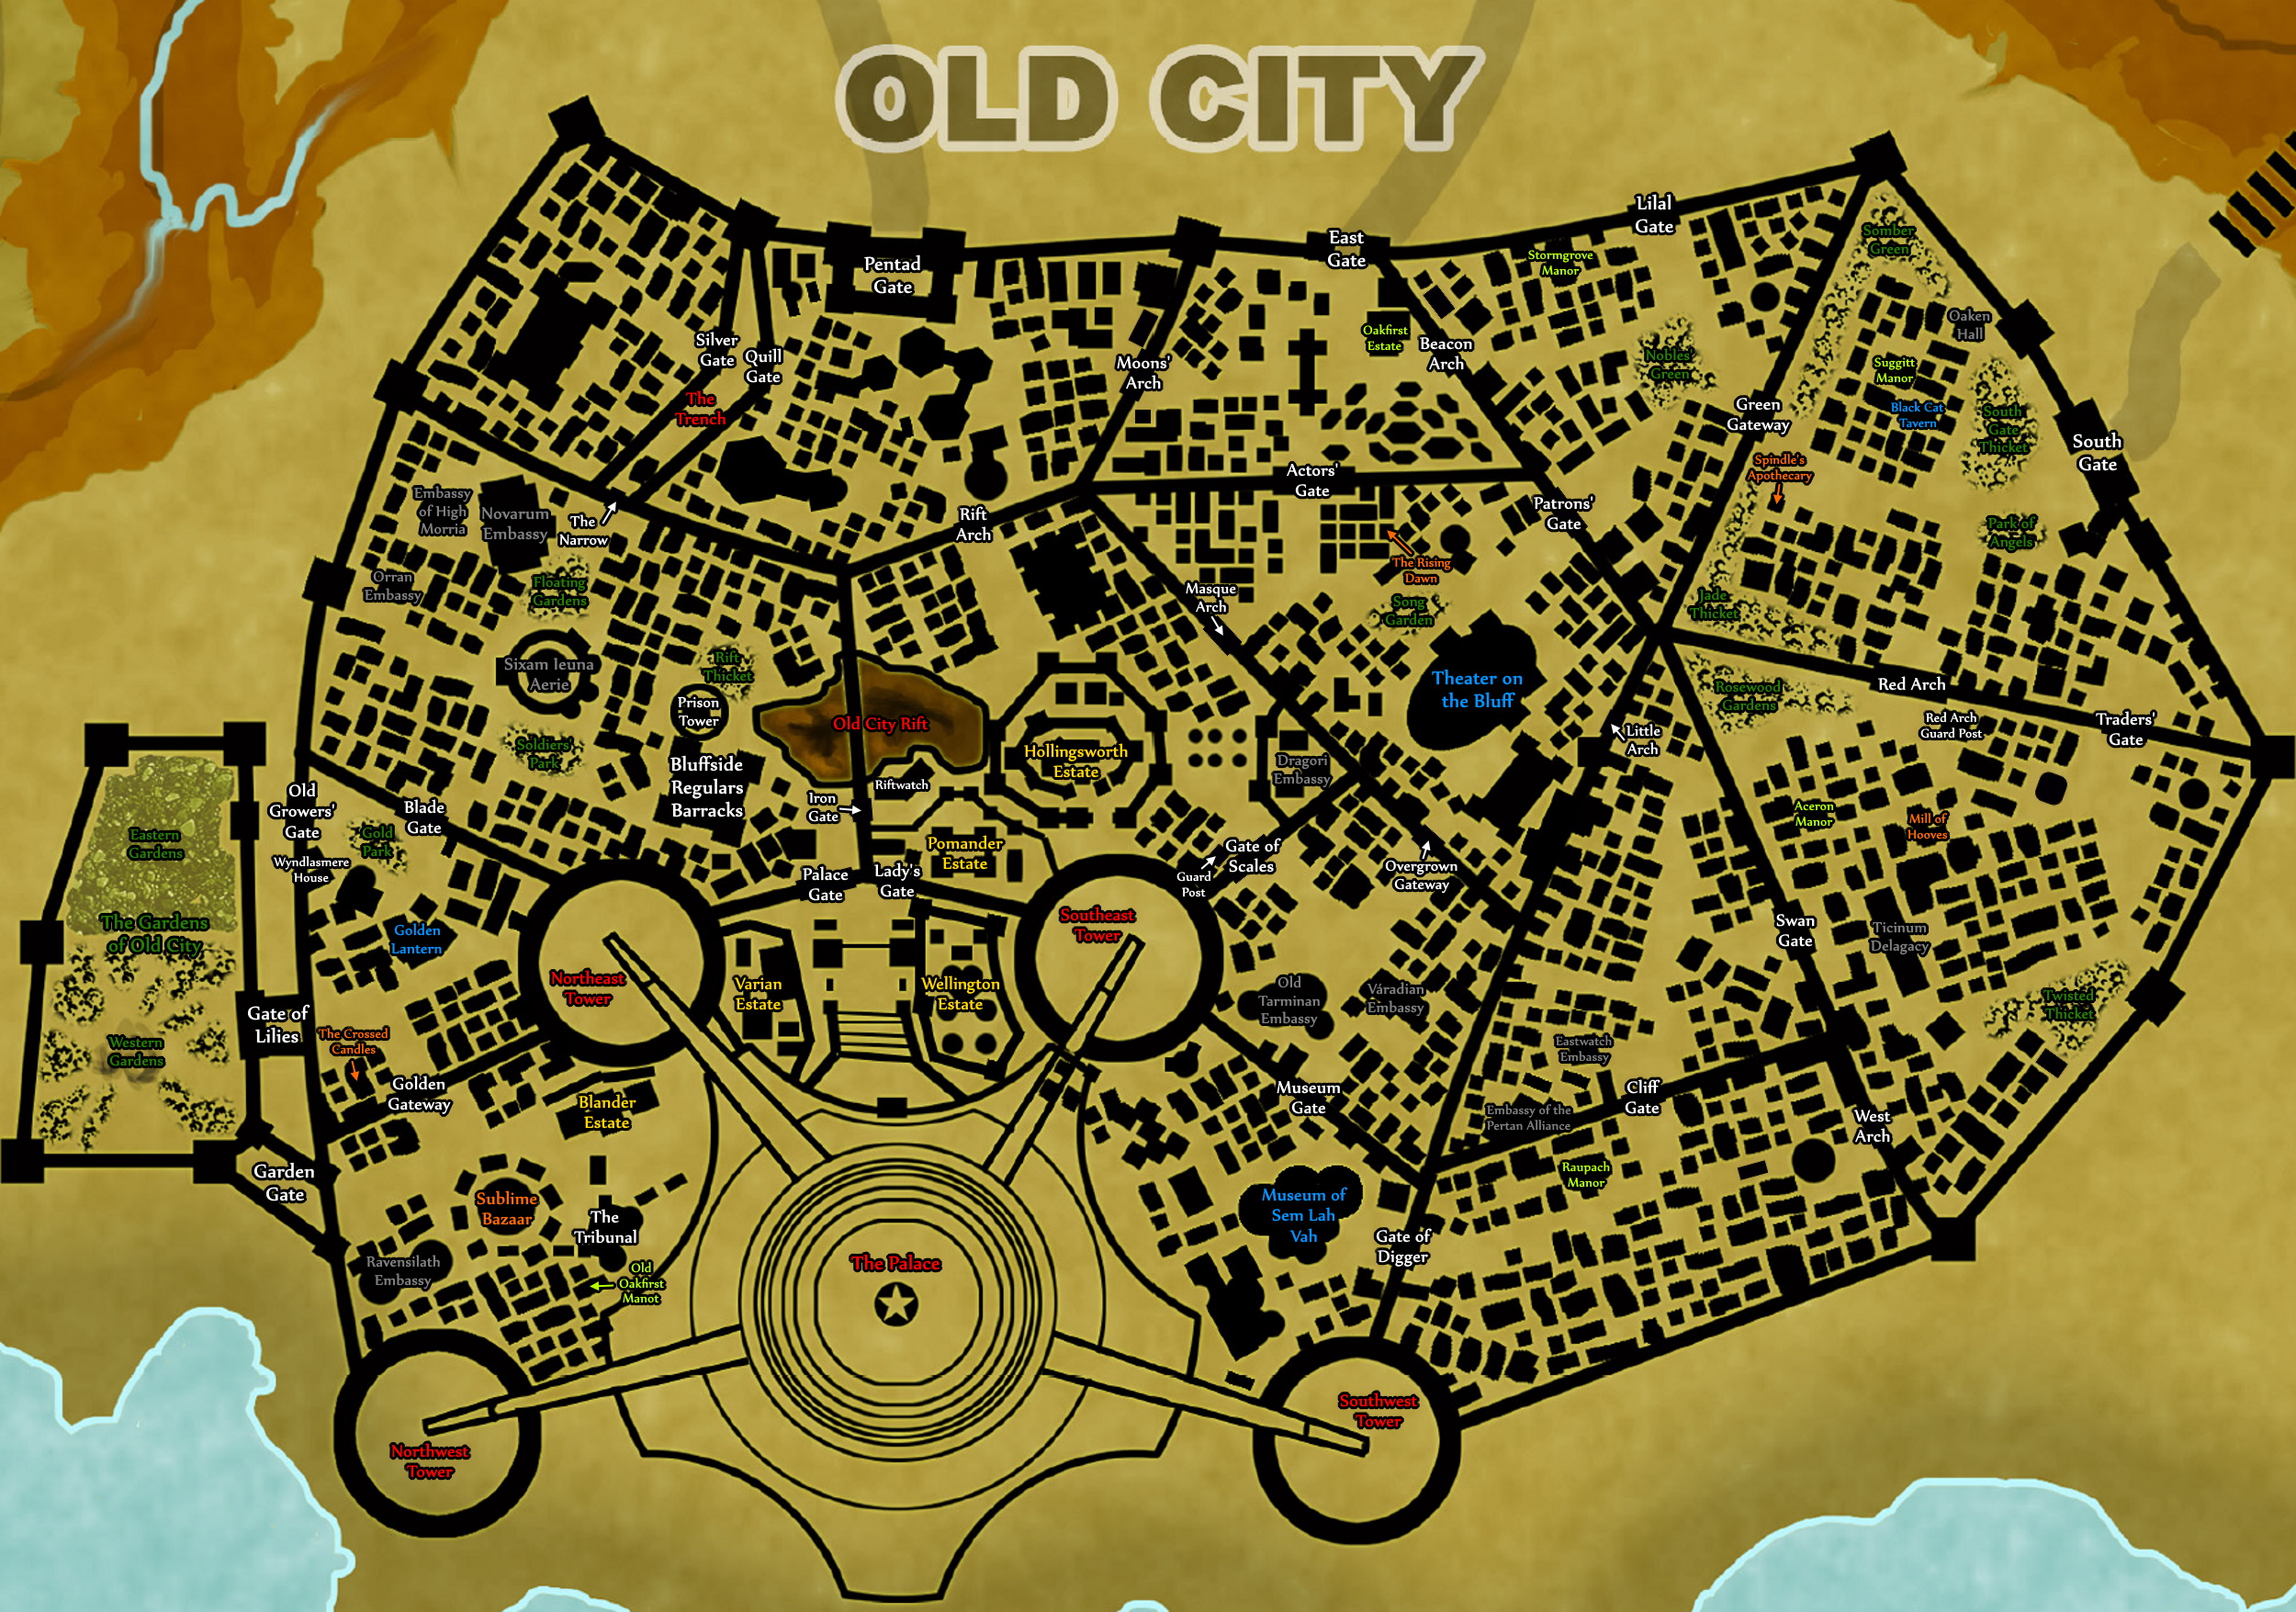 Old City_New Player's Map.jpg